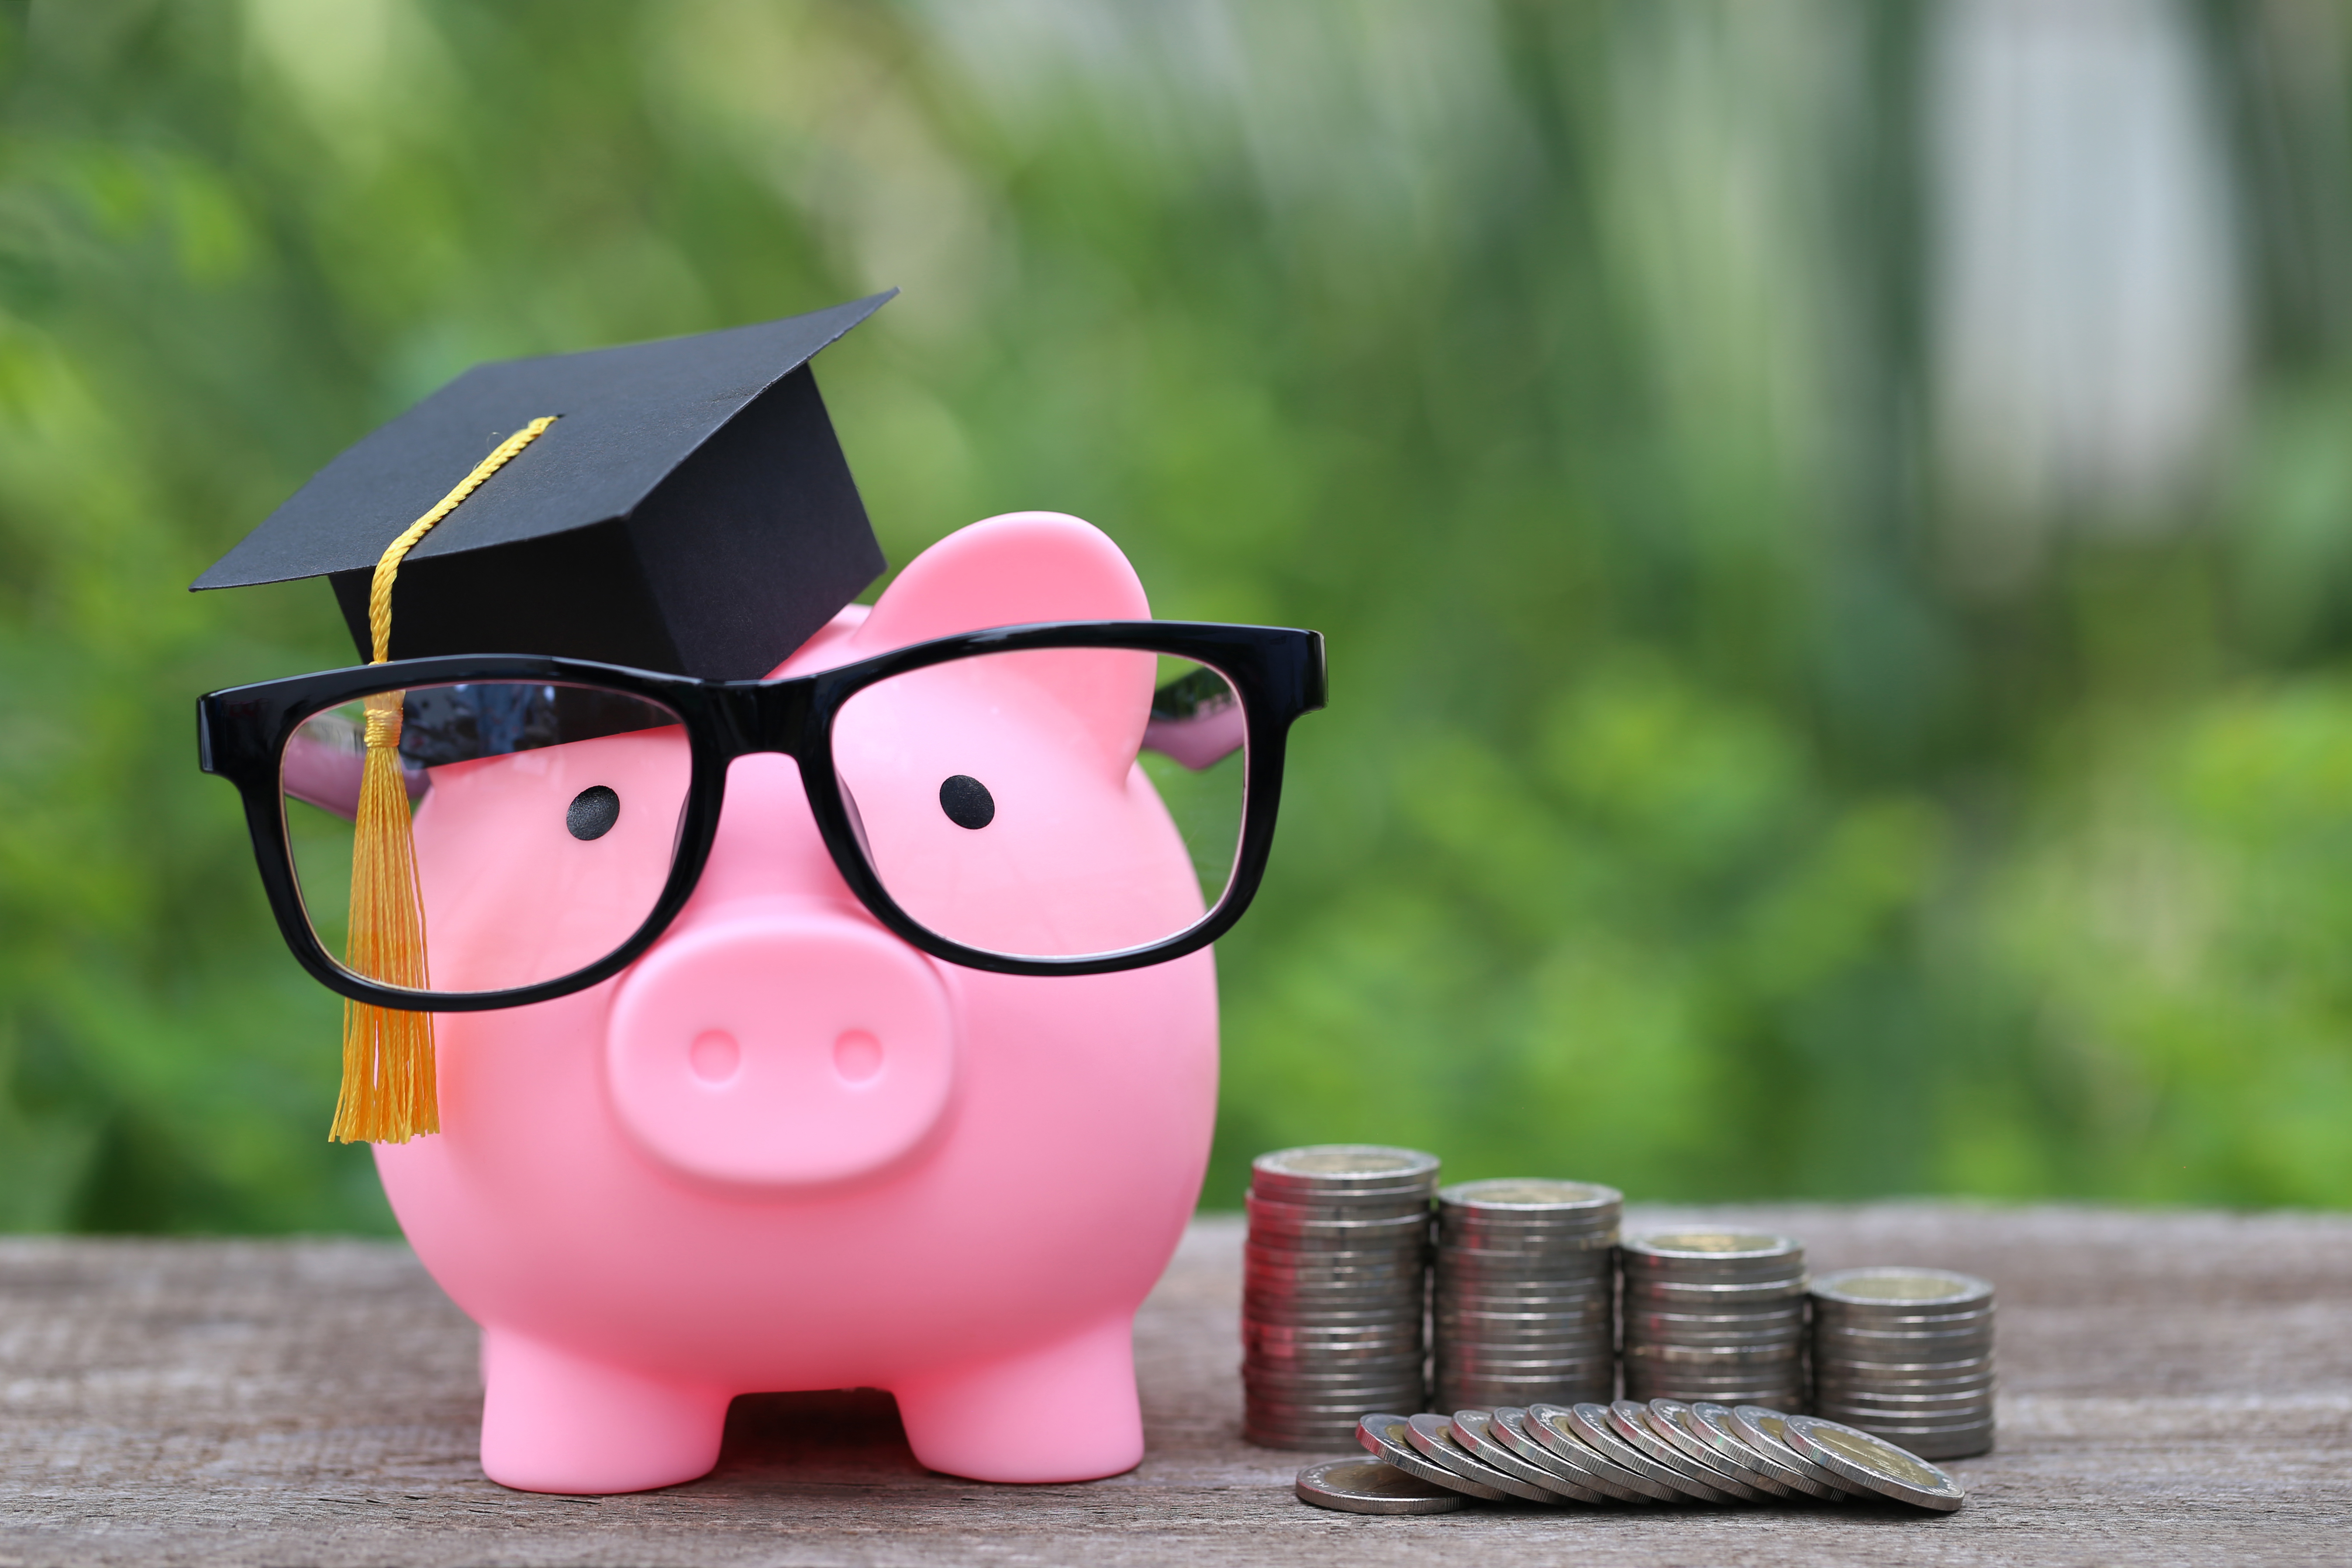 Piggy bank wearing glasses and a graduation cap next to stacks of coins